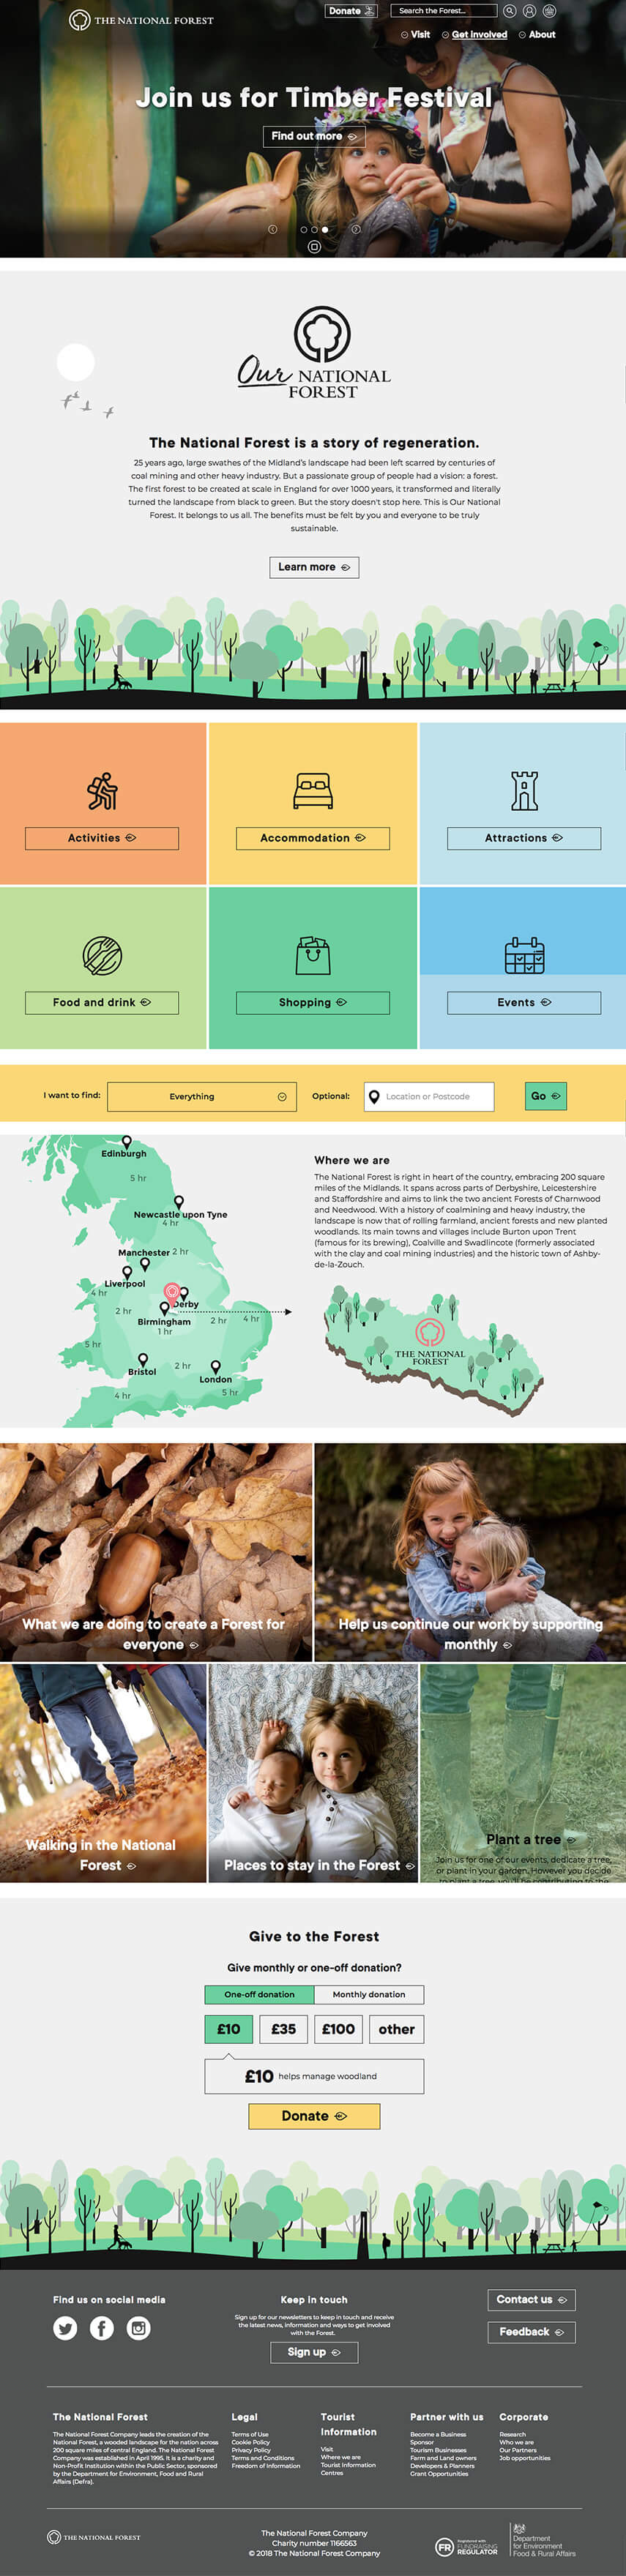 National-forest project image